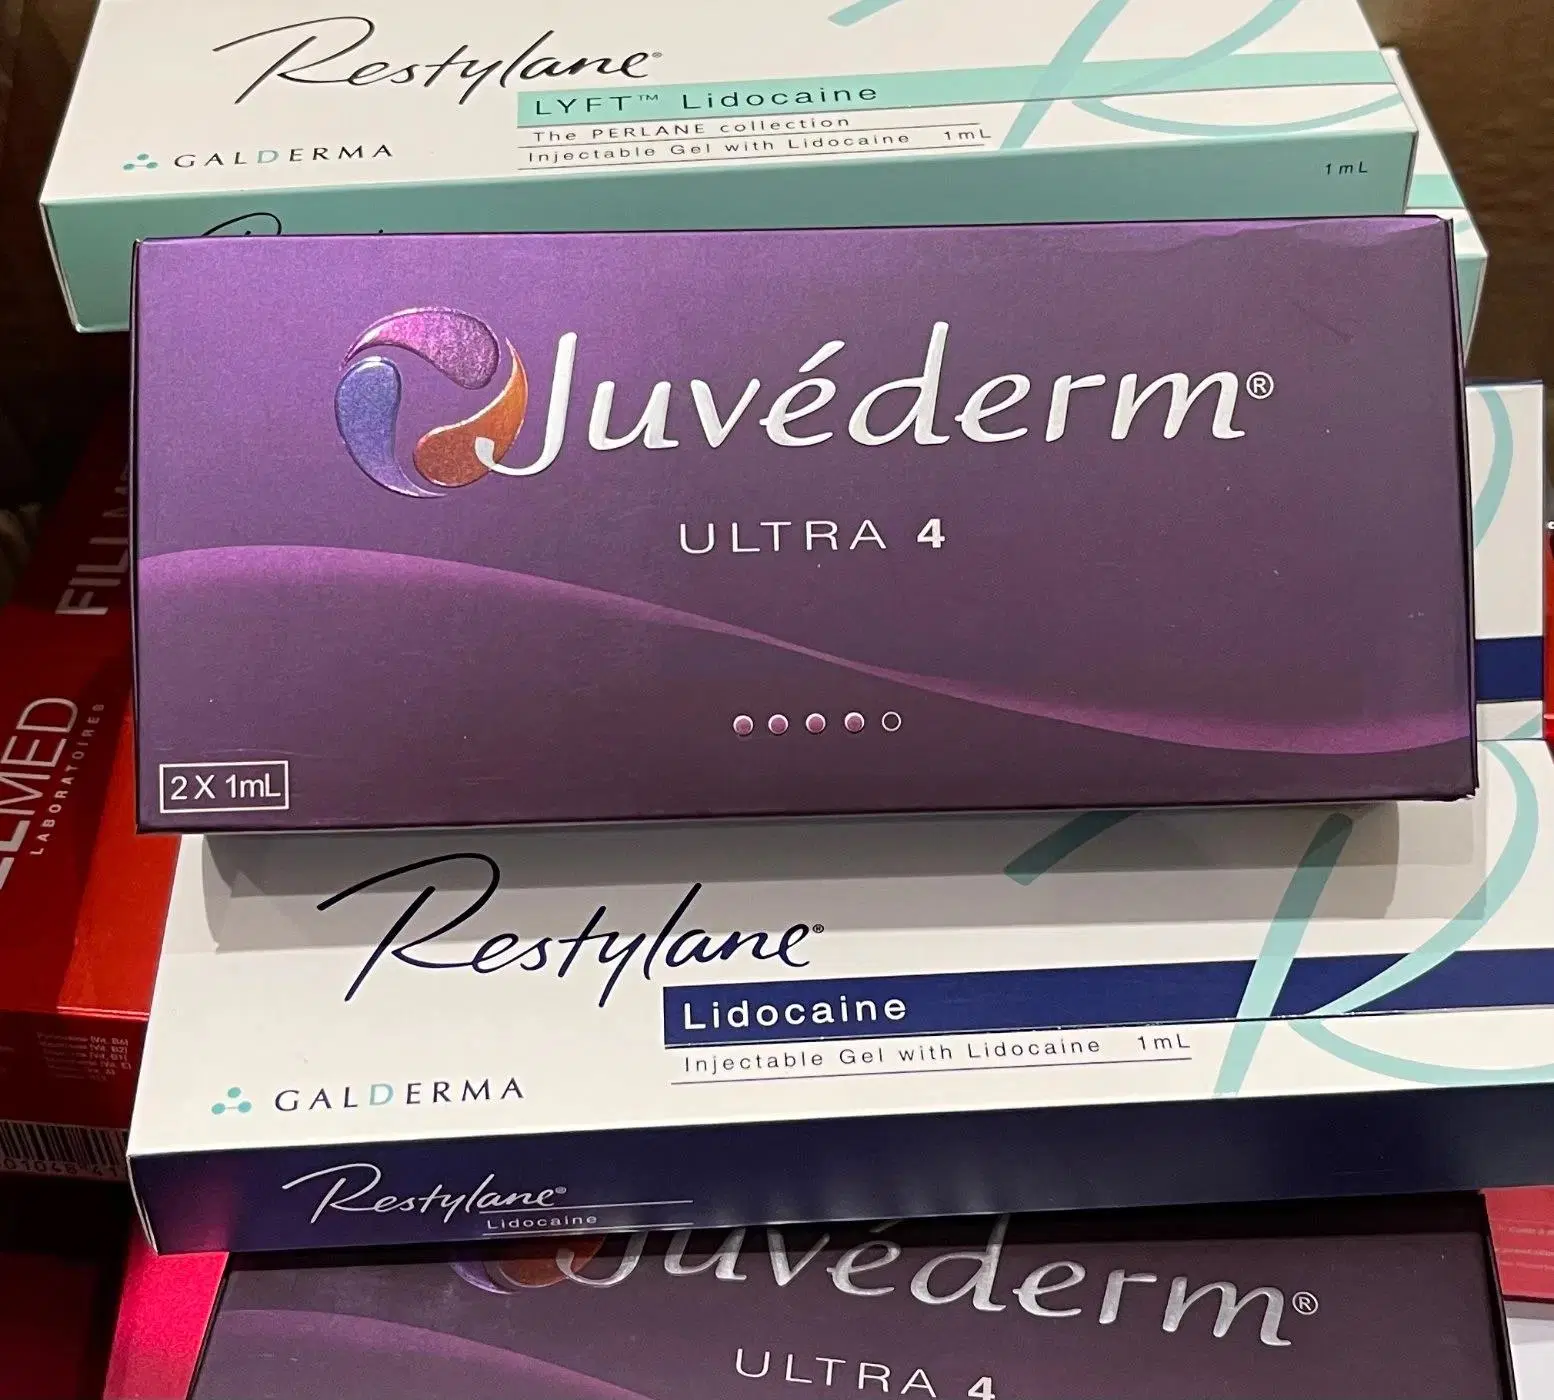 Juvederme's Injectable Dermal Filler Best Price Cosmetic Grade Face Hyaluronic Acid Lip Filler Neuramis Injection Stylage M XXL Yvoire